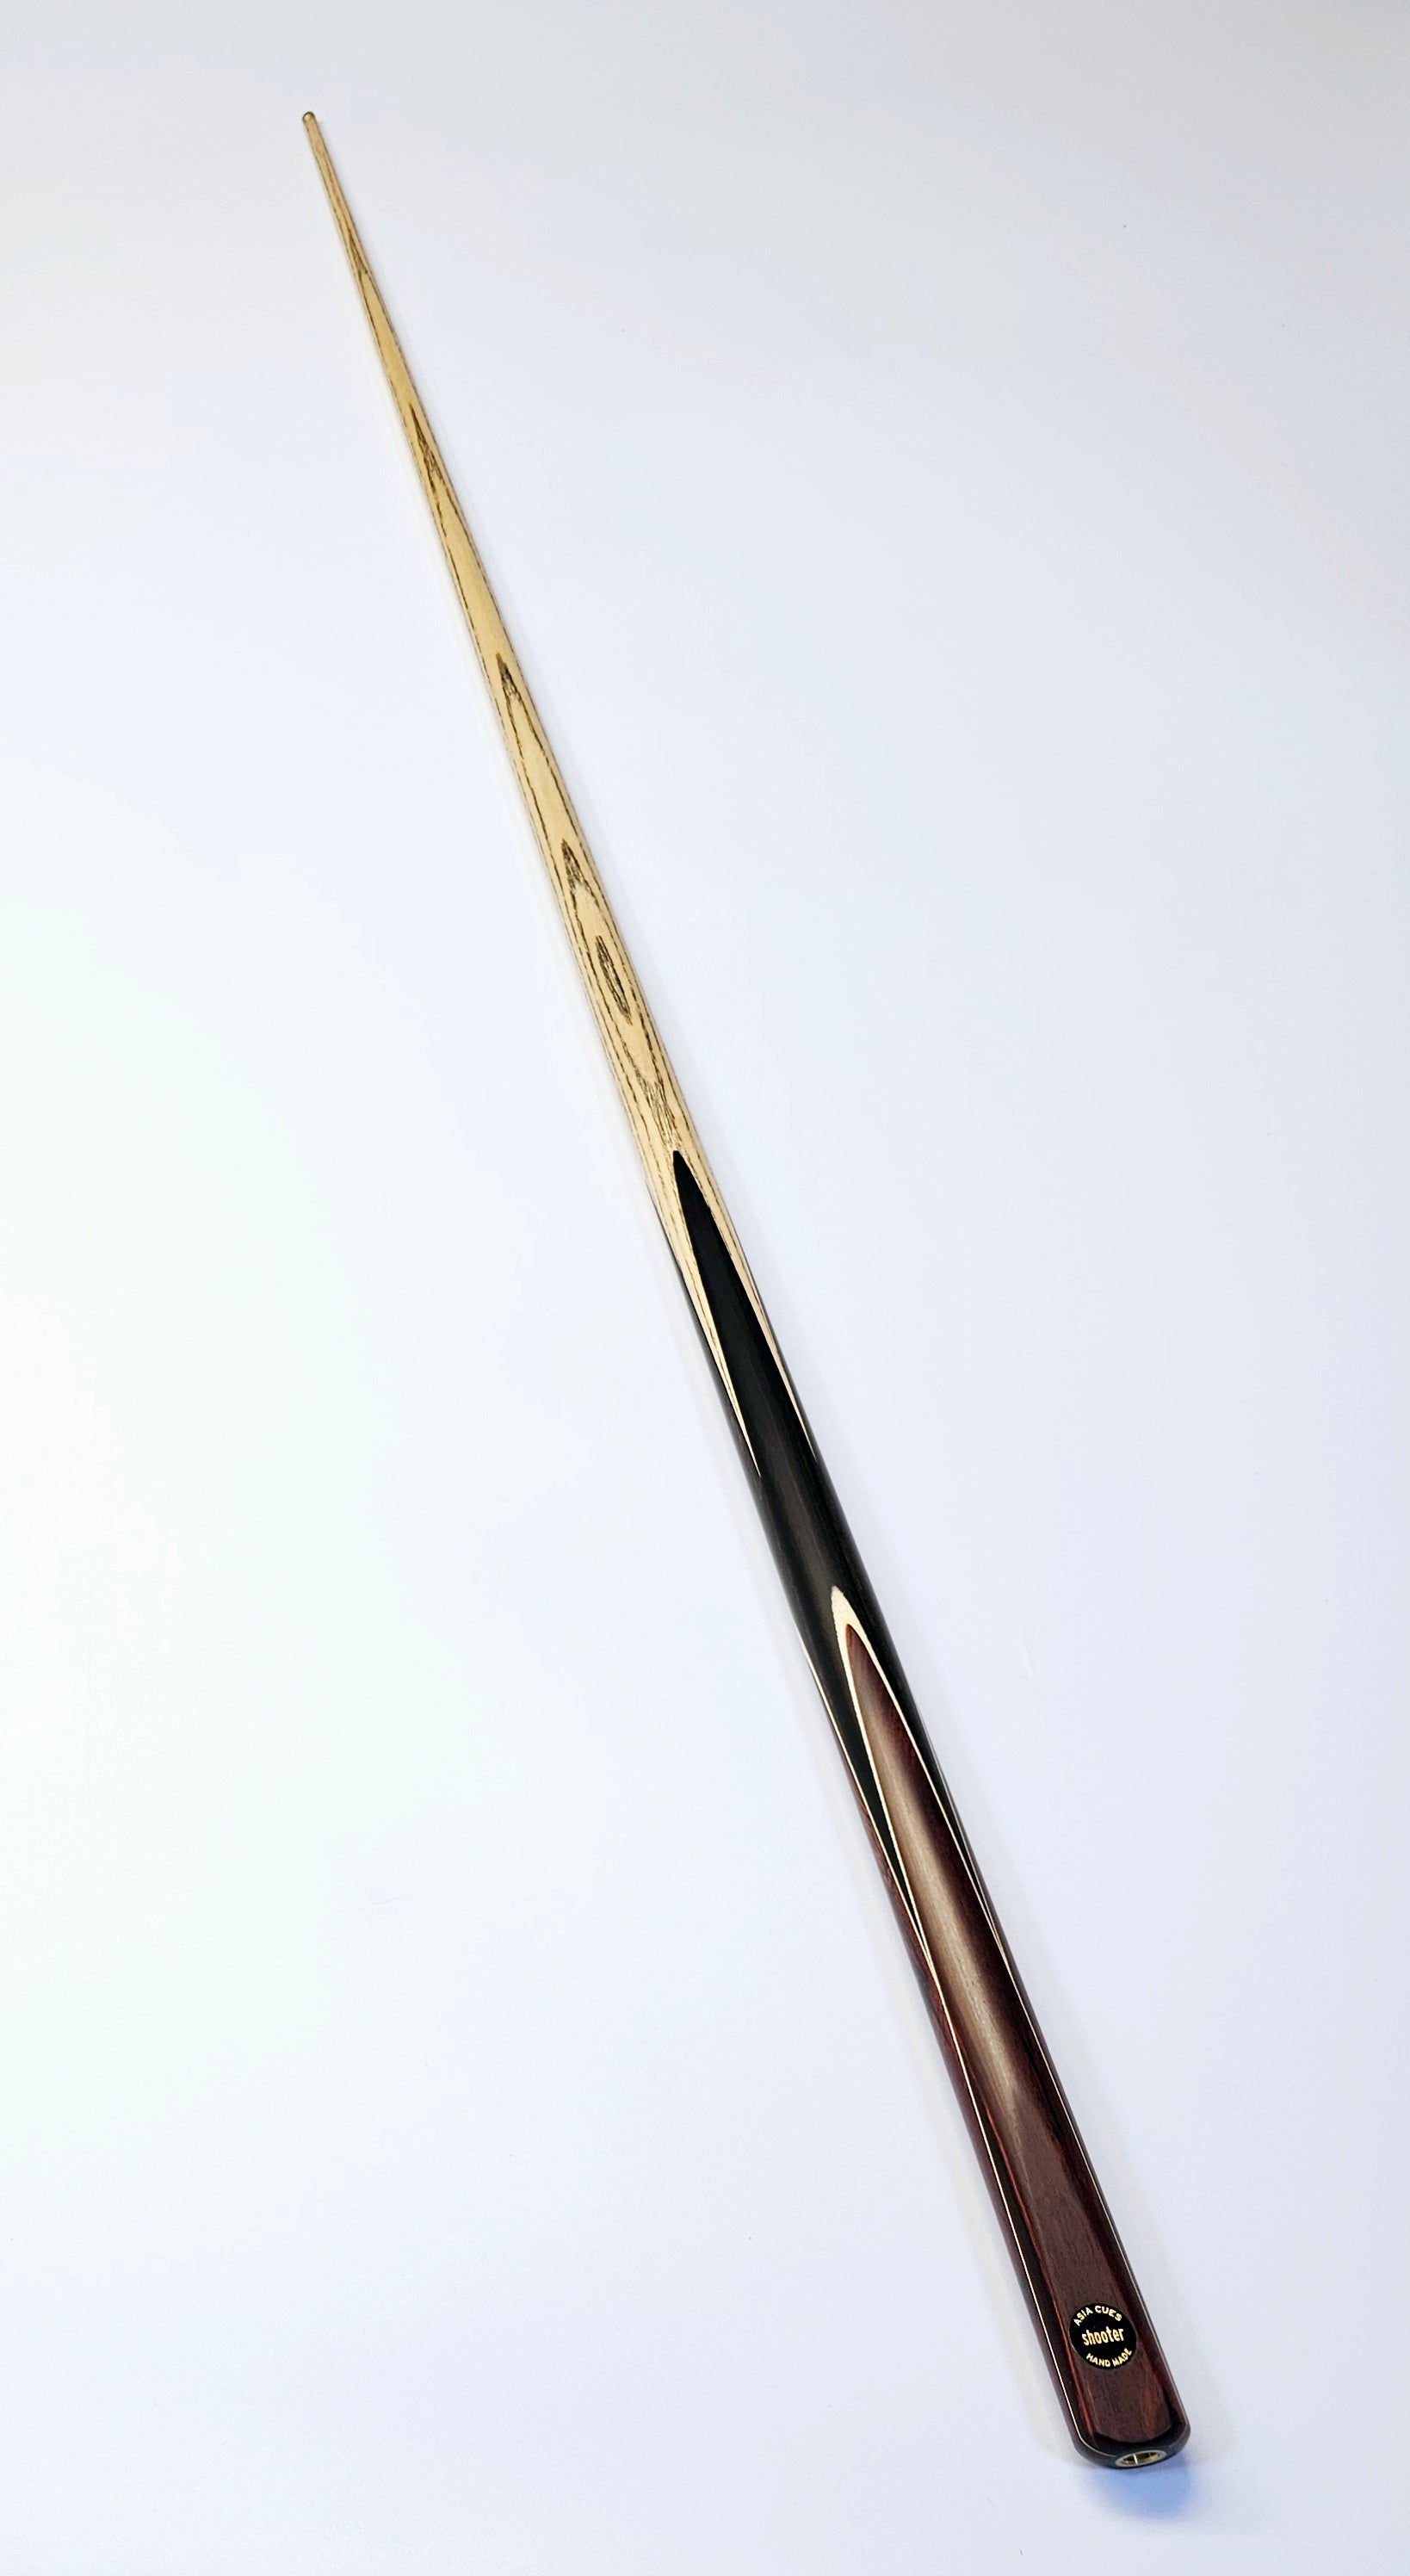 Asia Cues Shooter - One Piece Snooker Cue 9.7mm Tip, 18oz, 58"